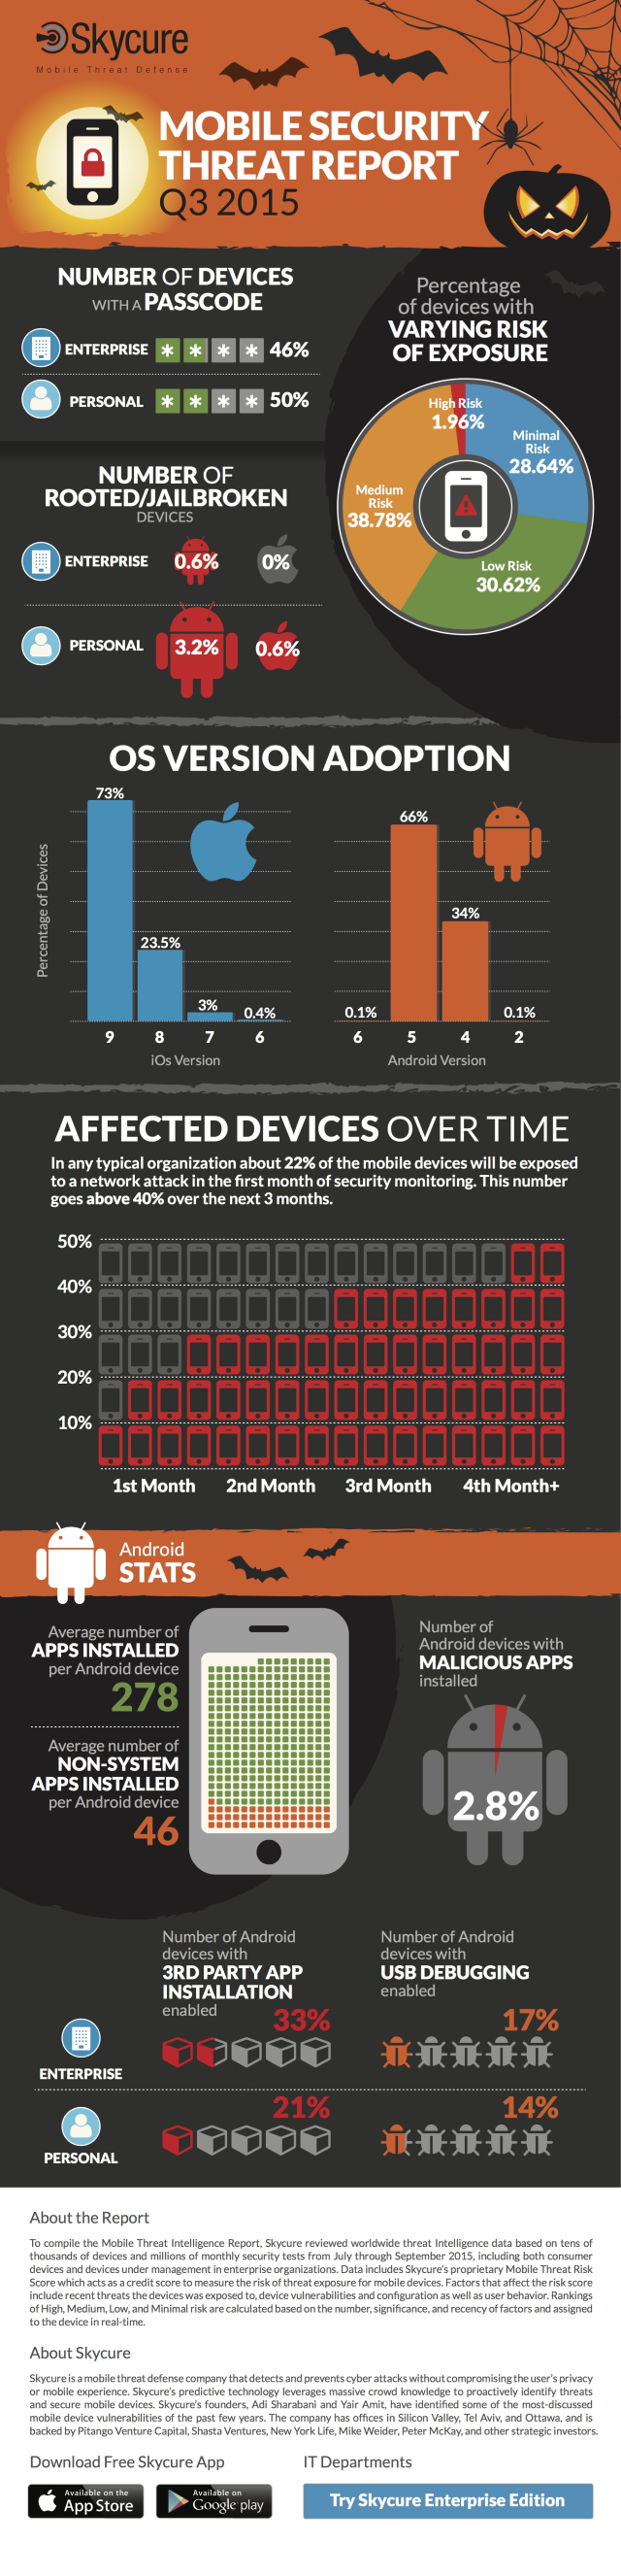 Skycure-Mobile-security-infographic.png